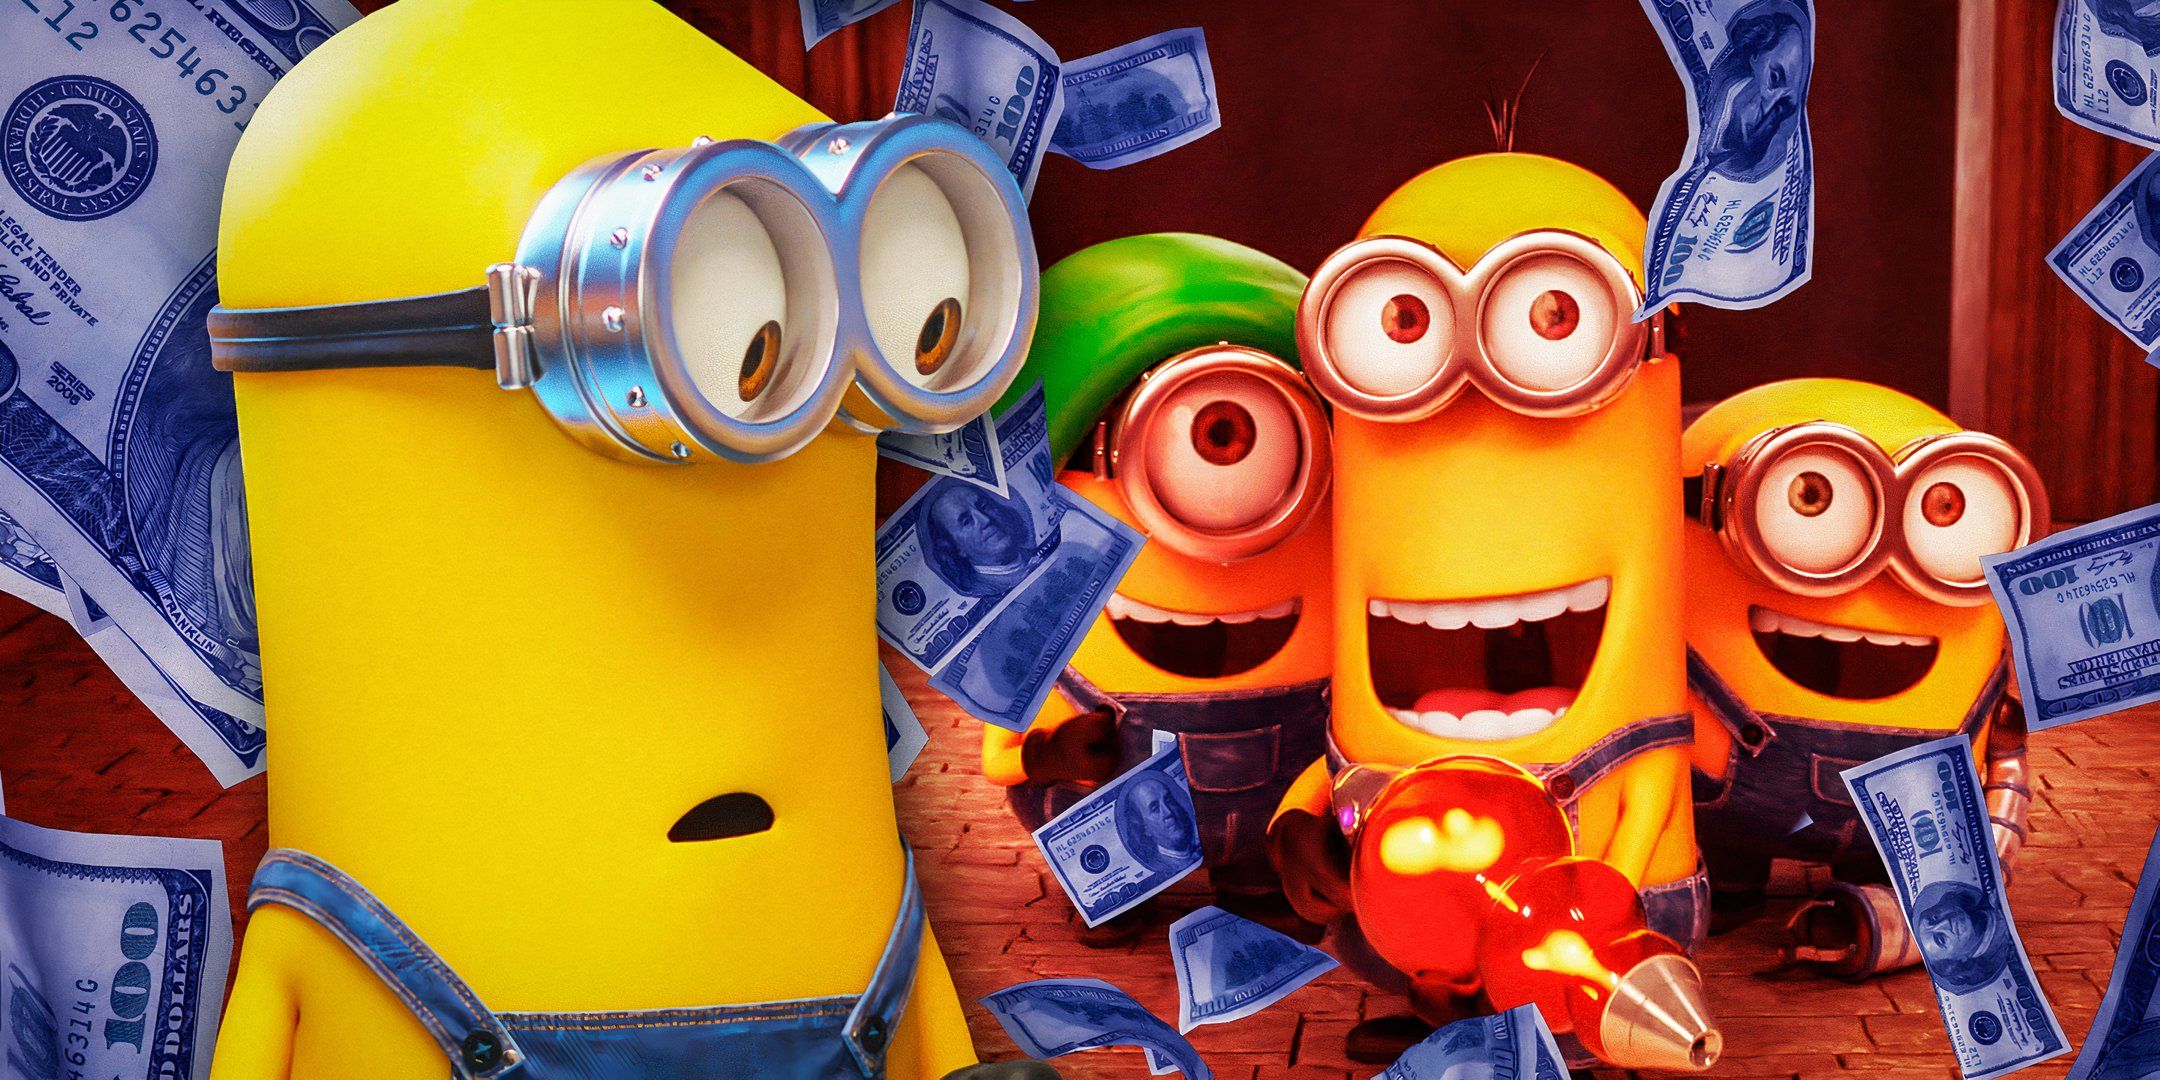 Minions from the Despicable Me franchise surrounded by falling money